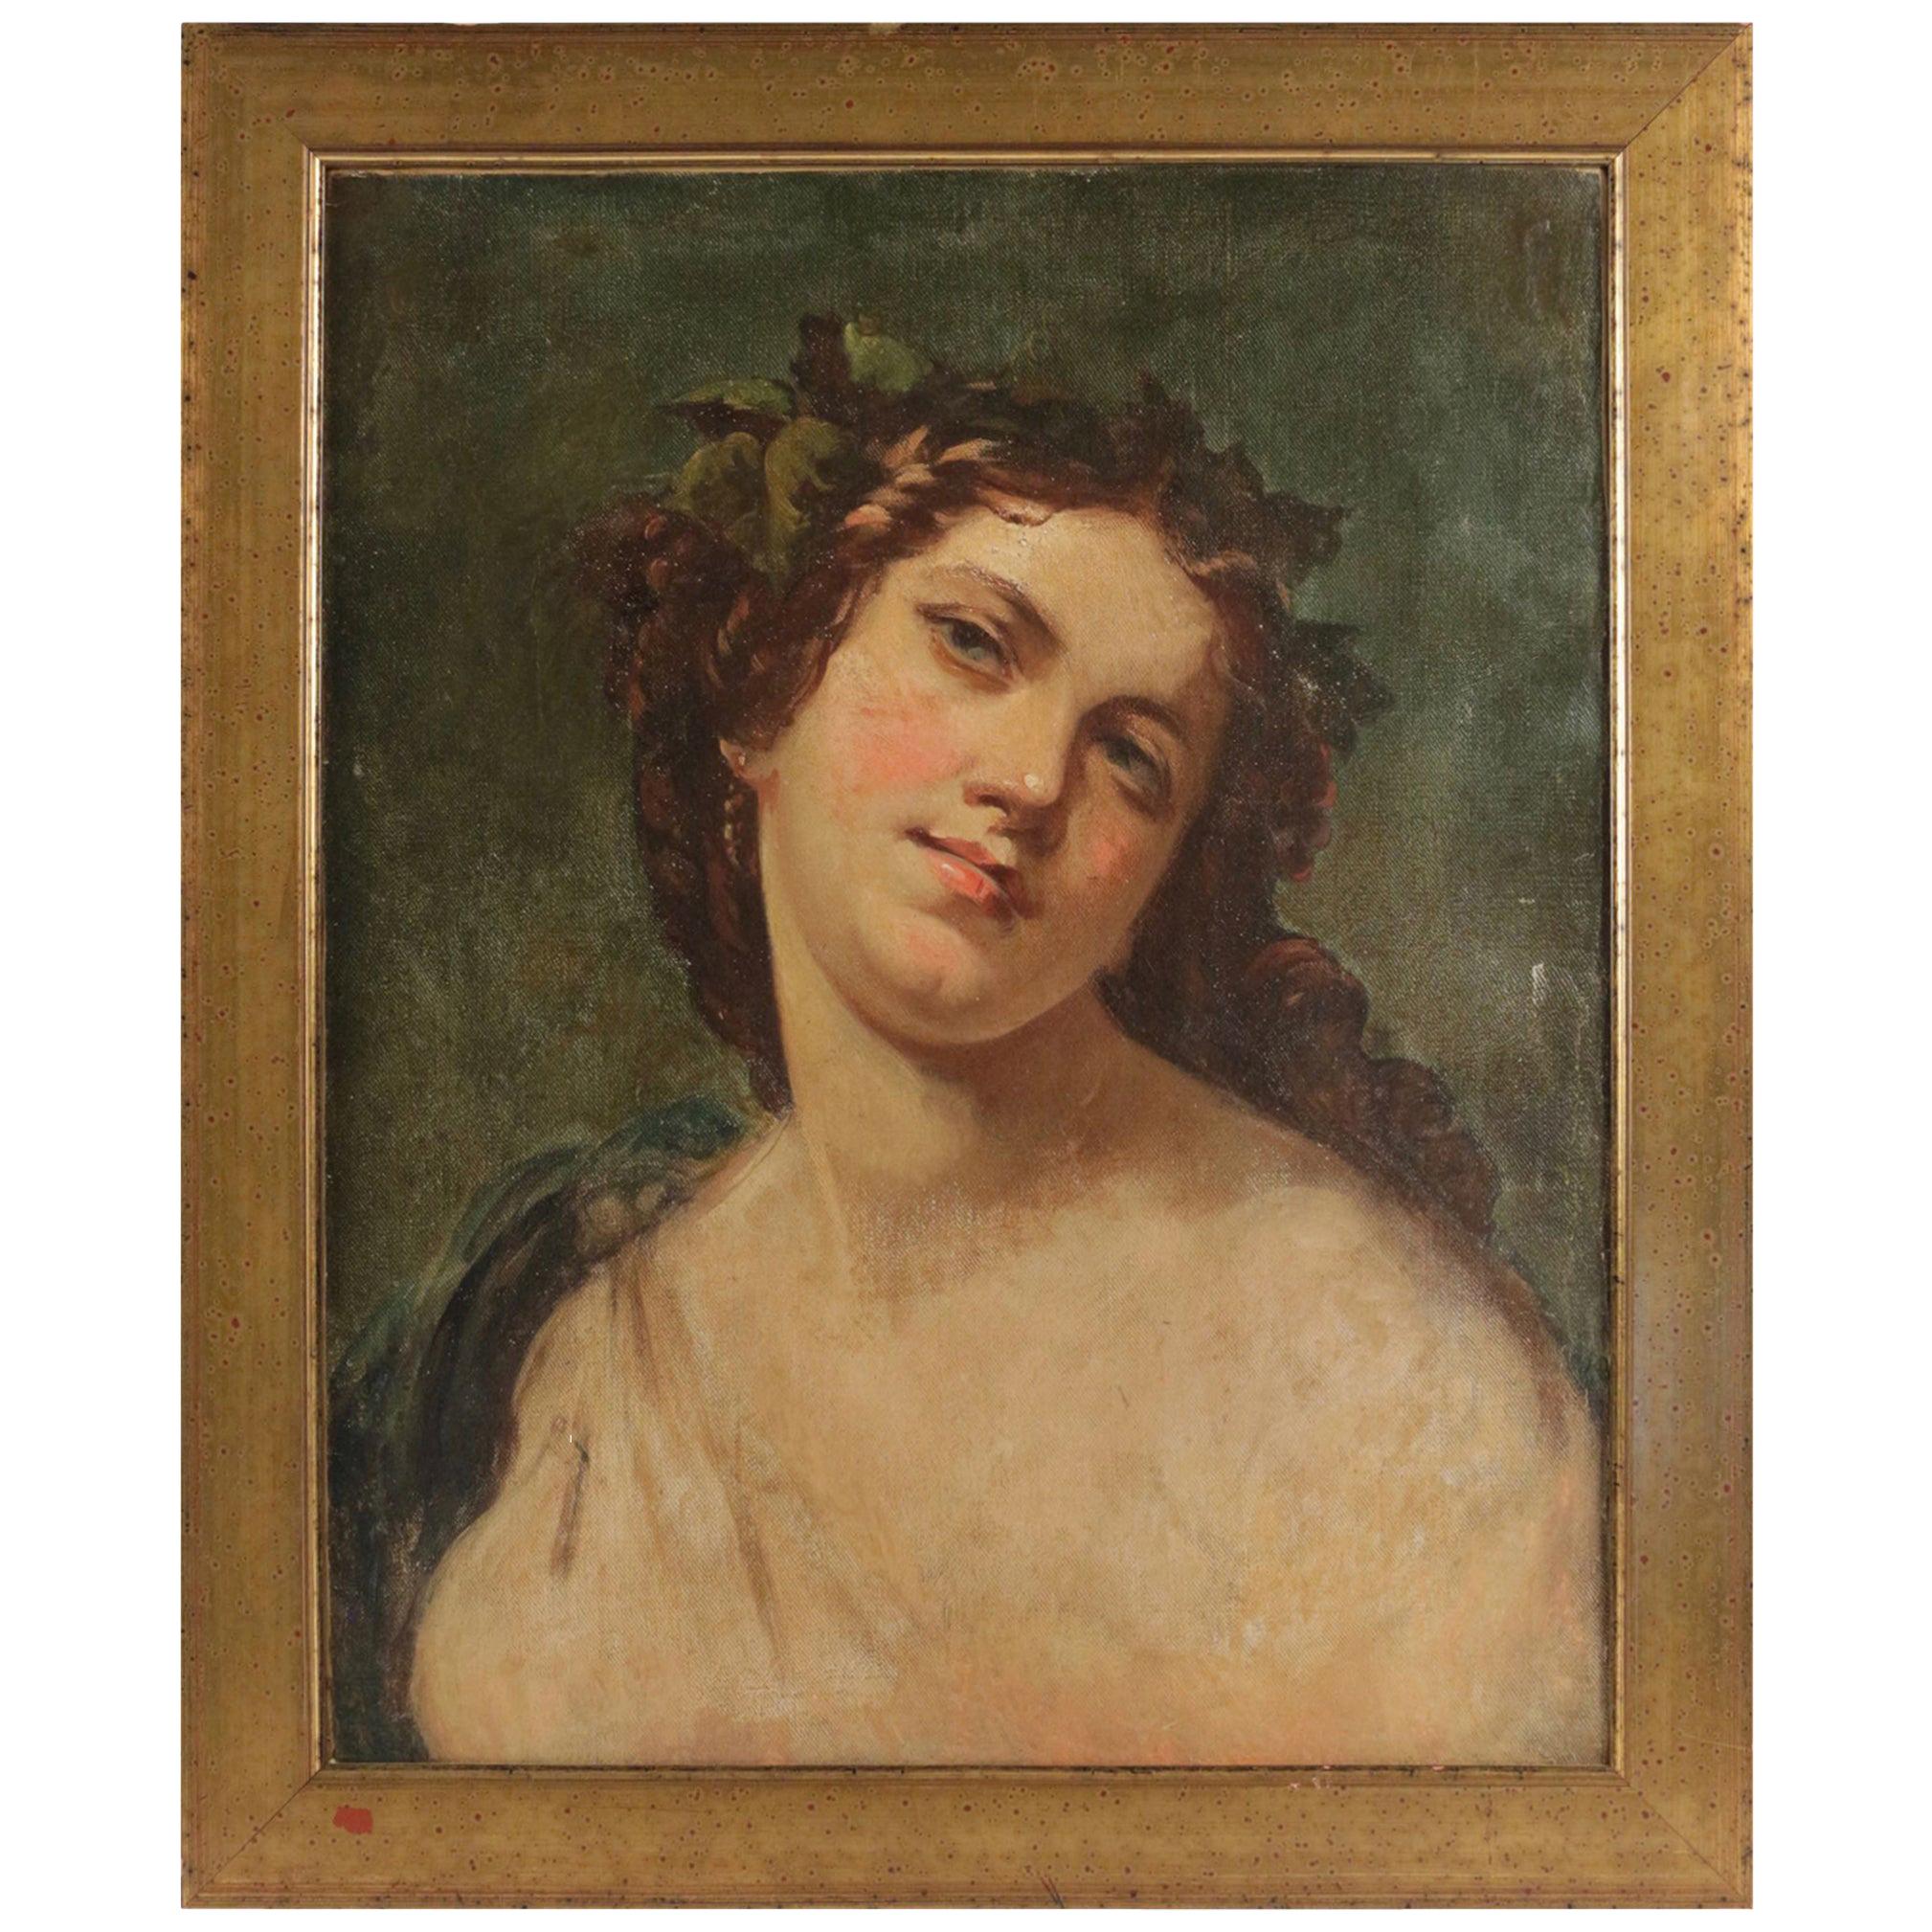 Elegant Portrait of the 19th Century Representing a Romantic Pose of a Woman For Sale